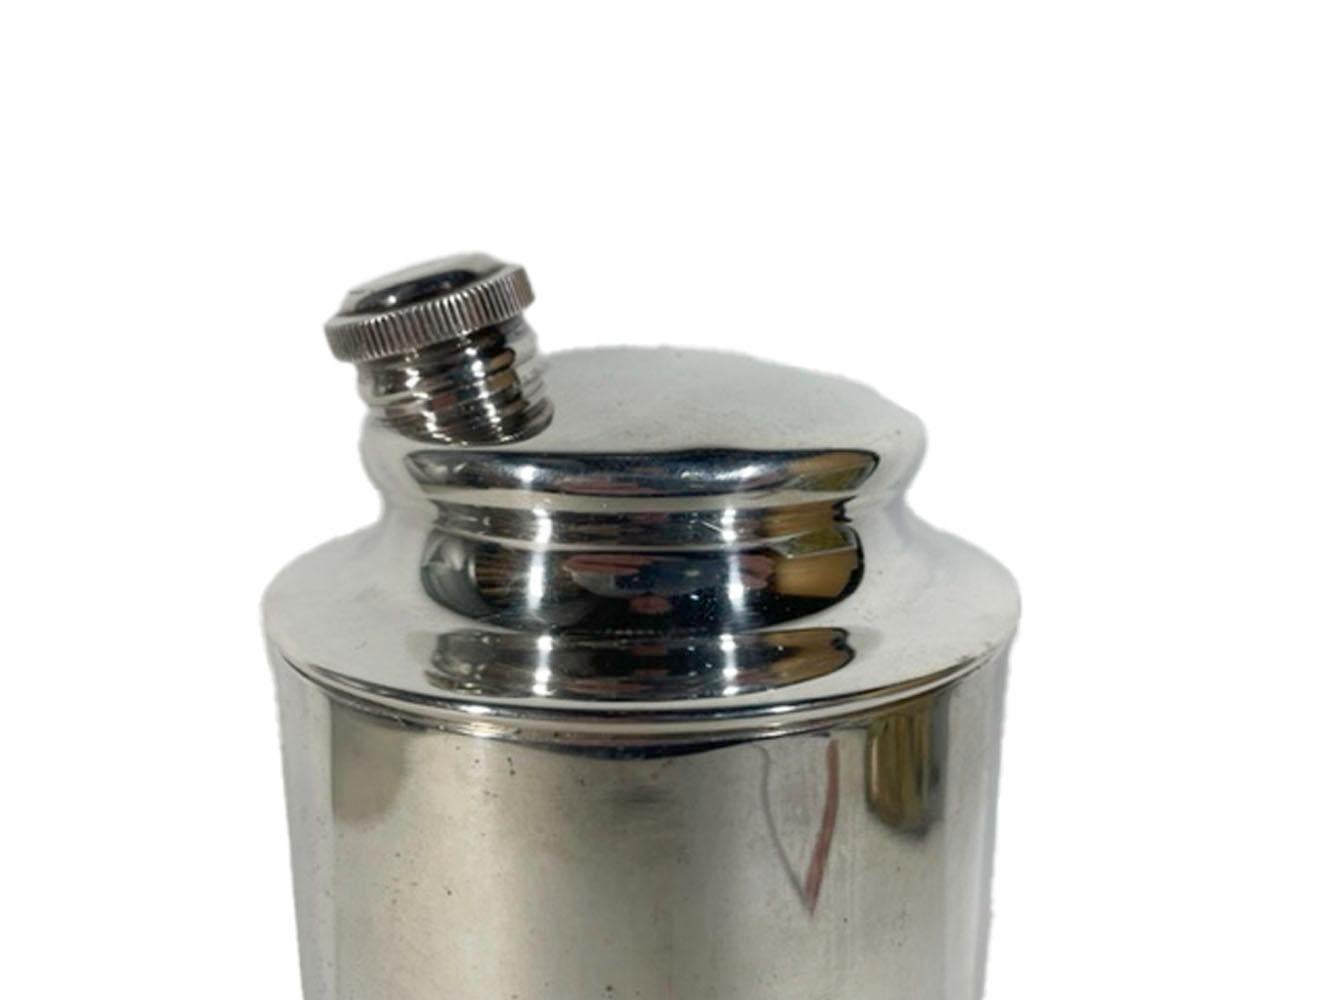 Large vintage silver plate modernist cocktail shaker of cylindrical form with a low-profile lid having an off-center angled pour spout.